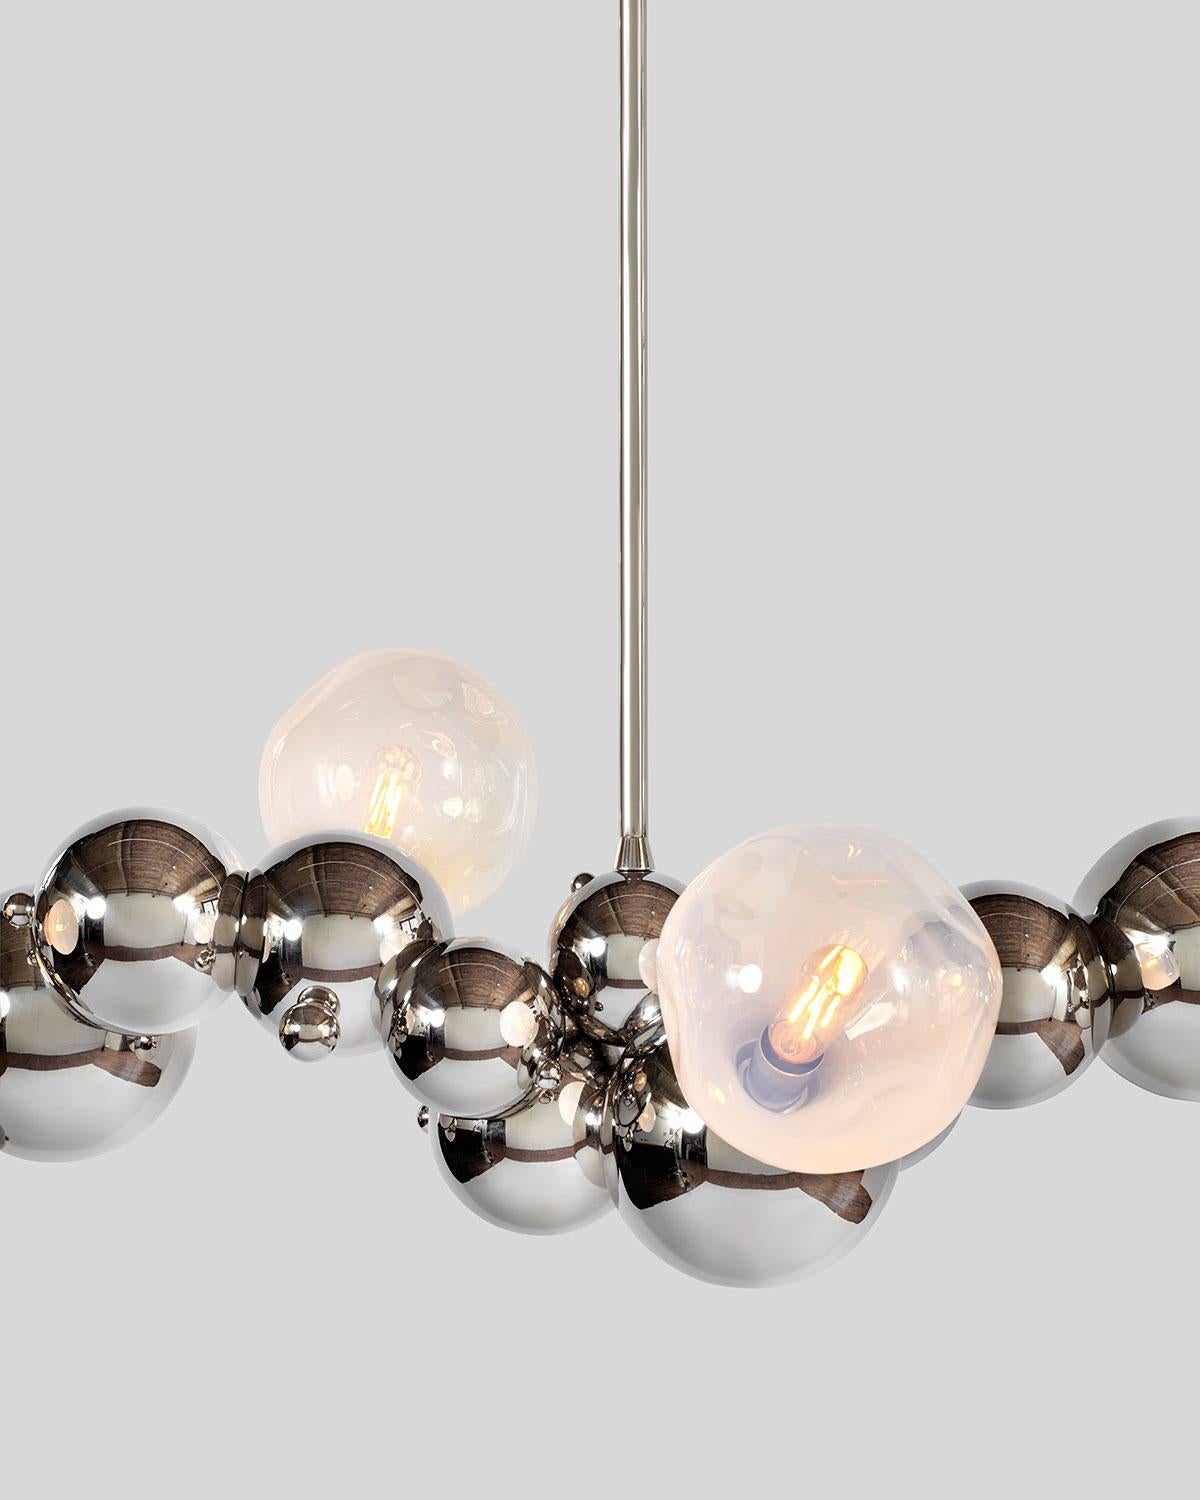 Large, organic chandelier with four hand blown glass lights made of interlocking spun brass spheres, from Rosie Li's 